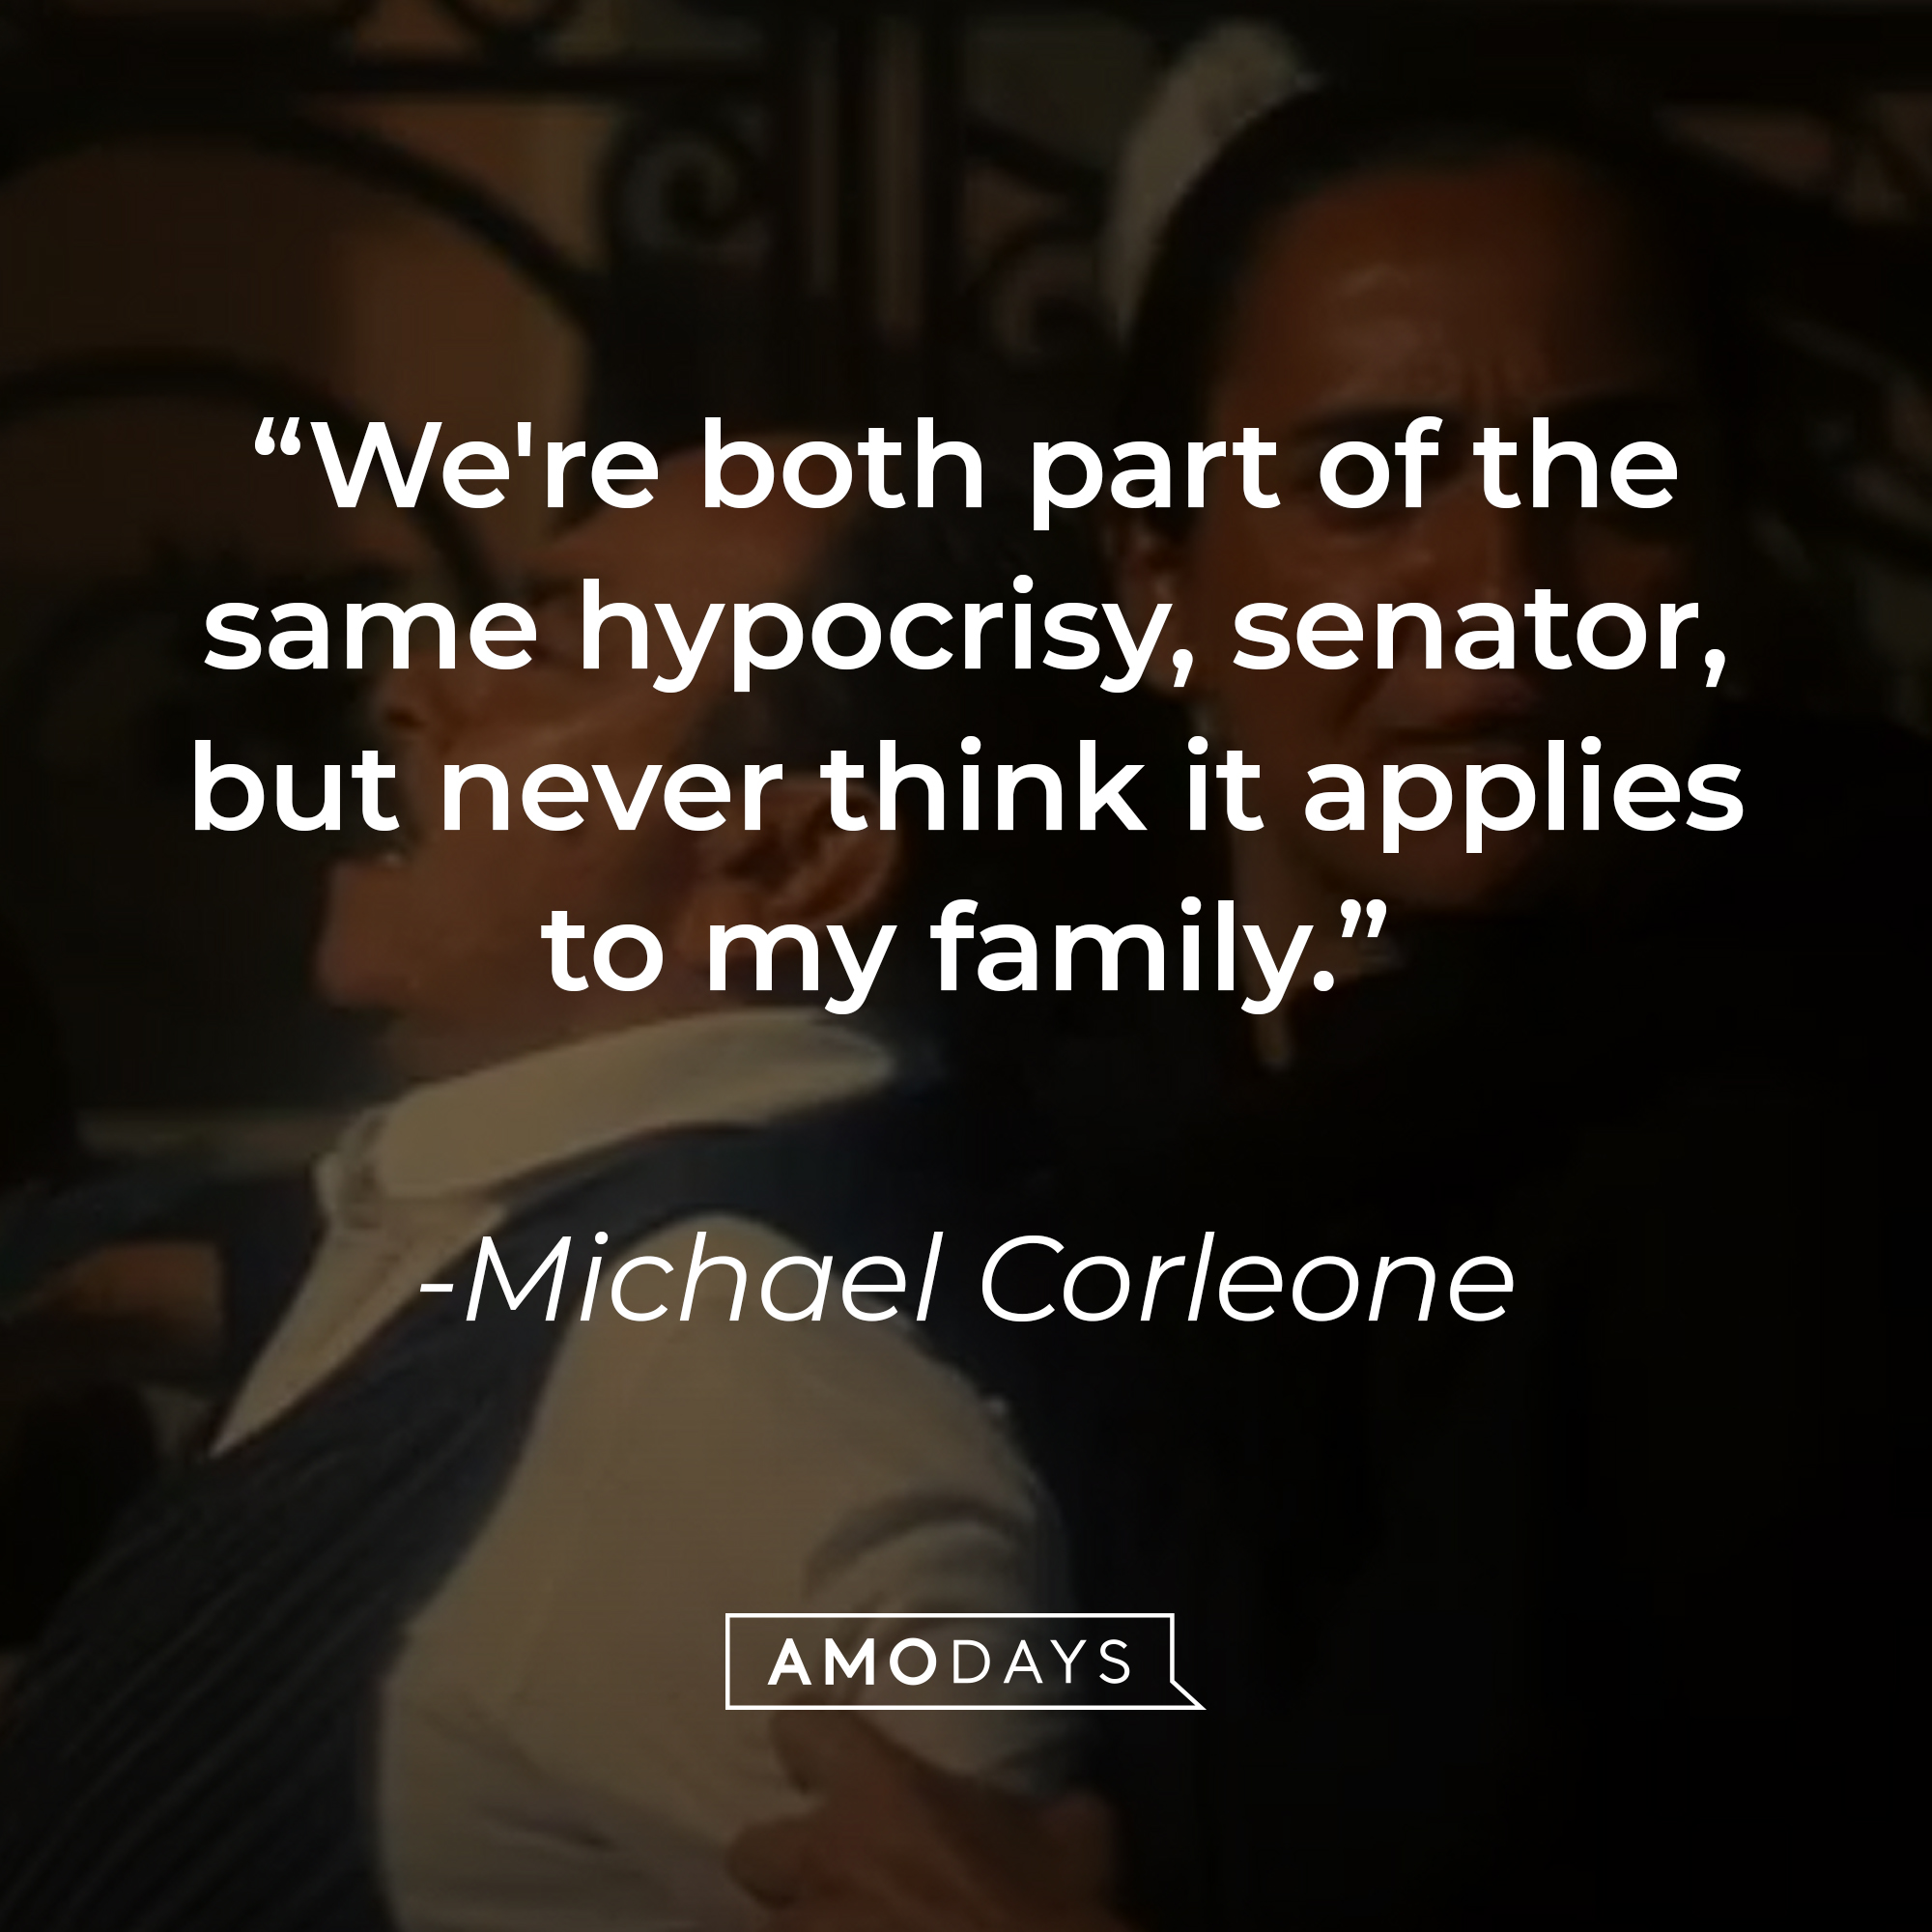 A photo from "The Godfather Part II" with the quote, "We're both part of the same hypocrisy, senator, but never think it applies to my family." | Source: YouTube/paramountpictures